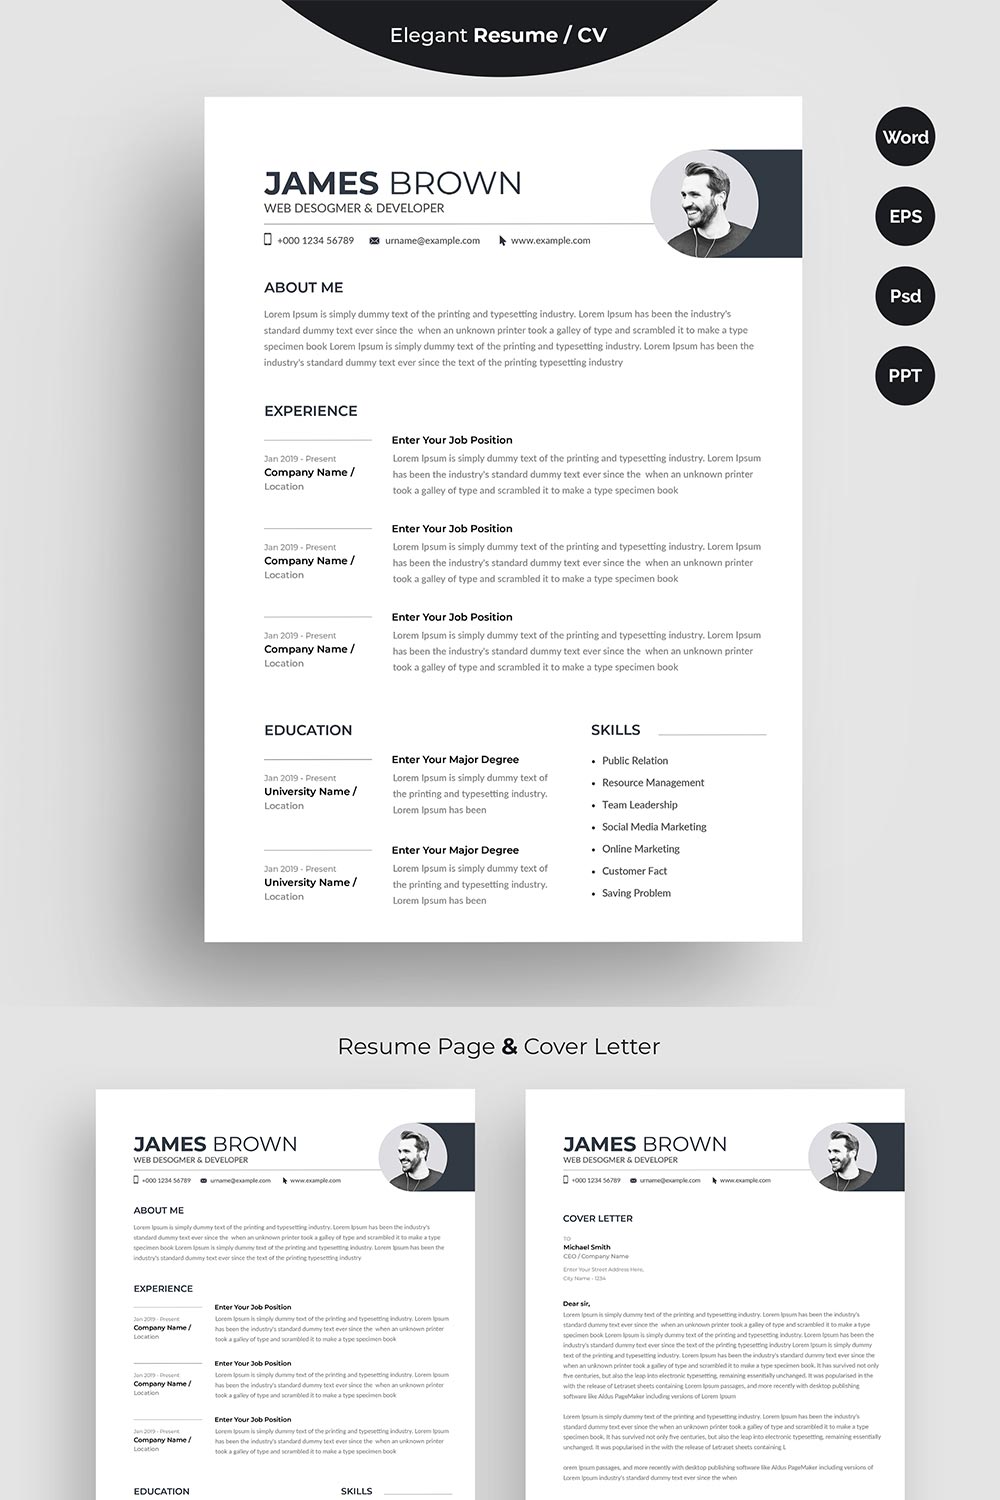 Clean and professional resume template with a black and white background.